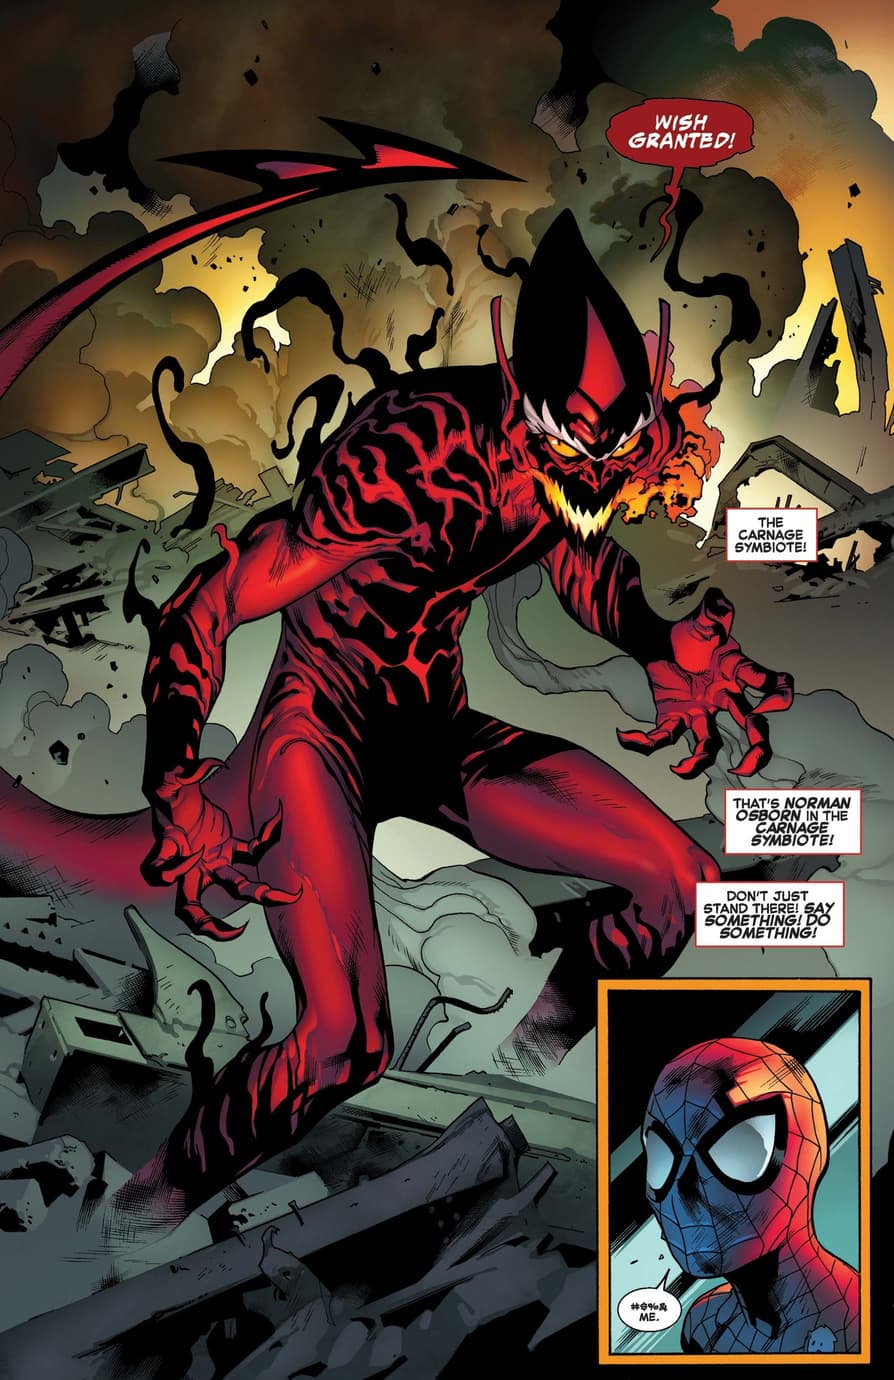 The Red Goblin rises in THE AMAZING SPIDER-MAN (2015) #798.